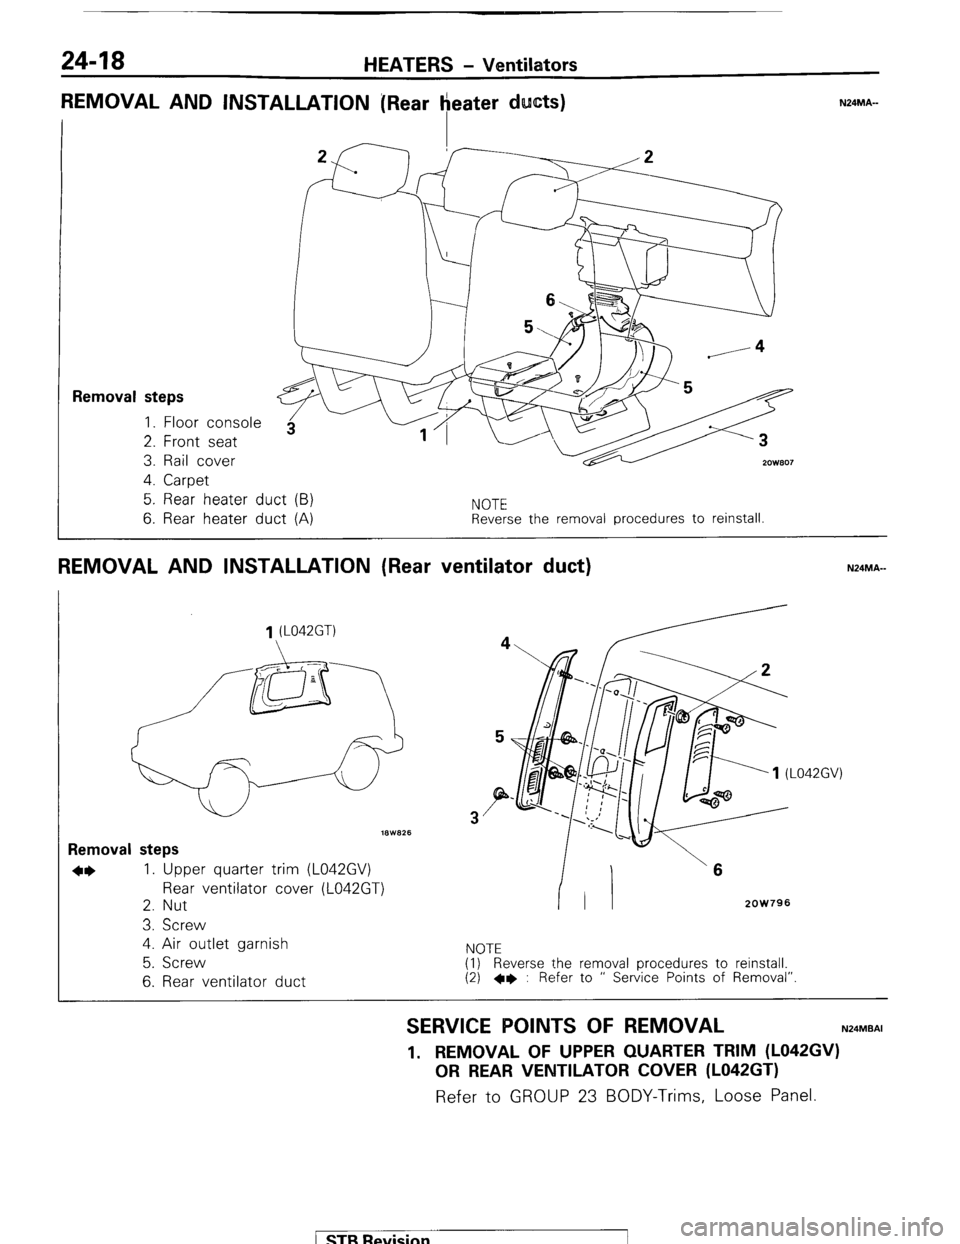 MITSUBISHI MONTERO 1987 1.G Workshop Manual 24-18 HEATERS - Ventilators 
REMOVAL AND INSTALLATION [Rear heater ducts) 
I 7F-T f------A 
1 
Removal steps 1. Floor console 
2. Front seat 
3. Rail cover 
2ow.307 4. Carpet 
5. Rear heater duct (B)